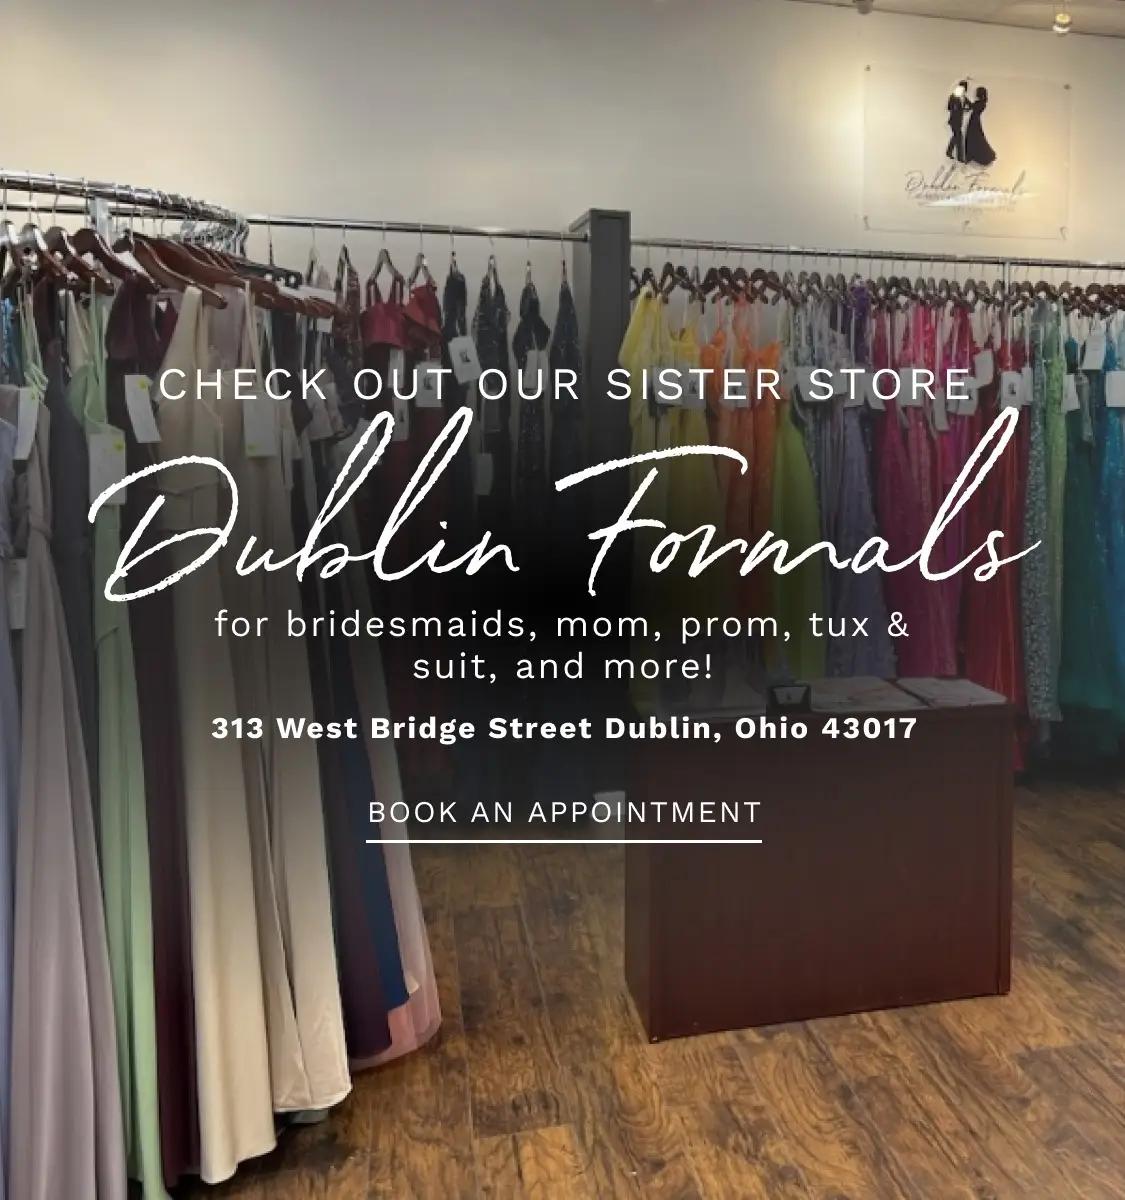 Dublin Formals sister store. Prom, mother of the bride, tuxedos and more!